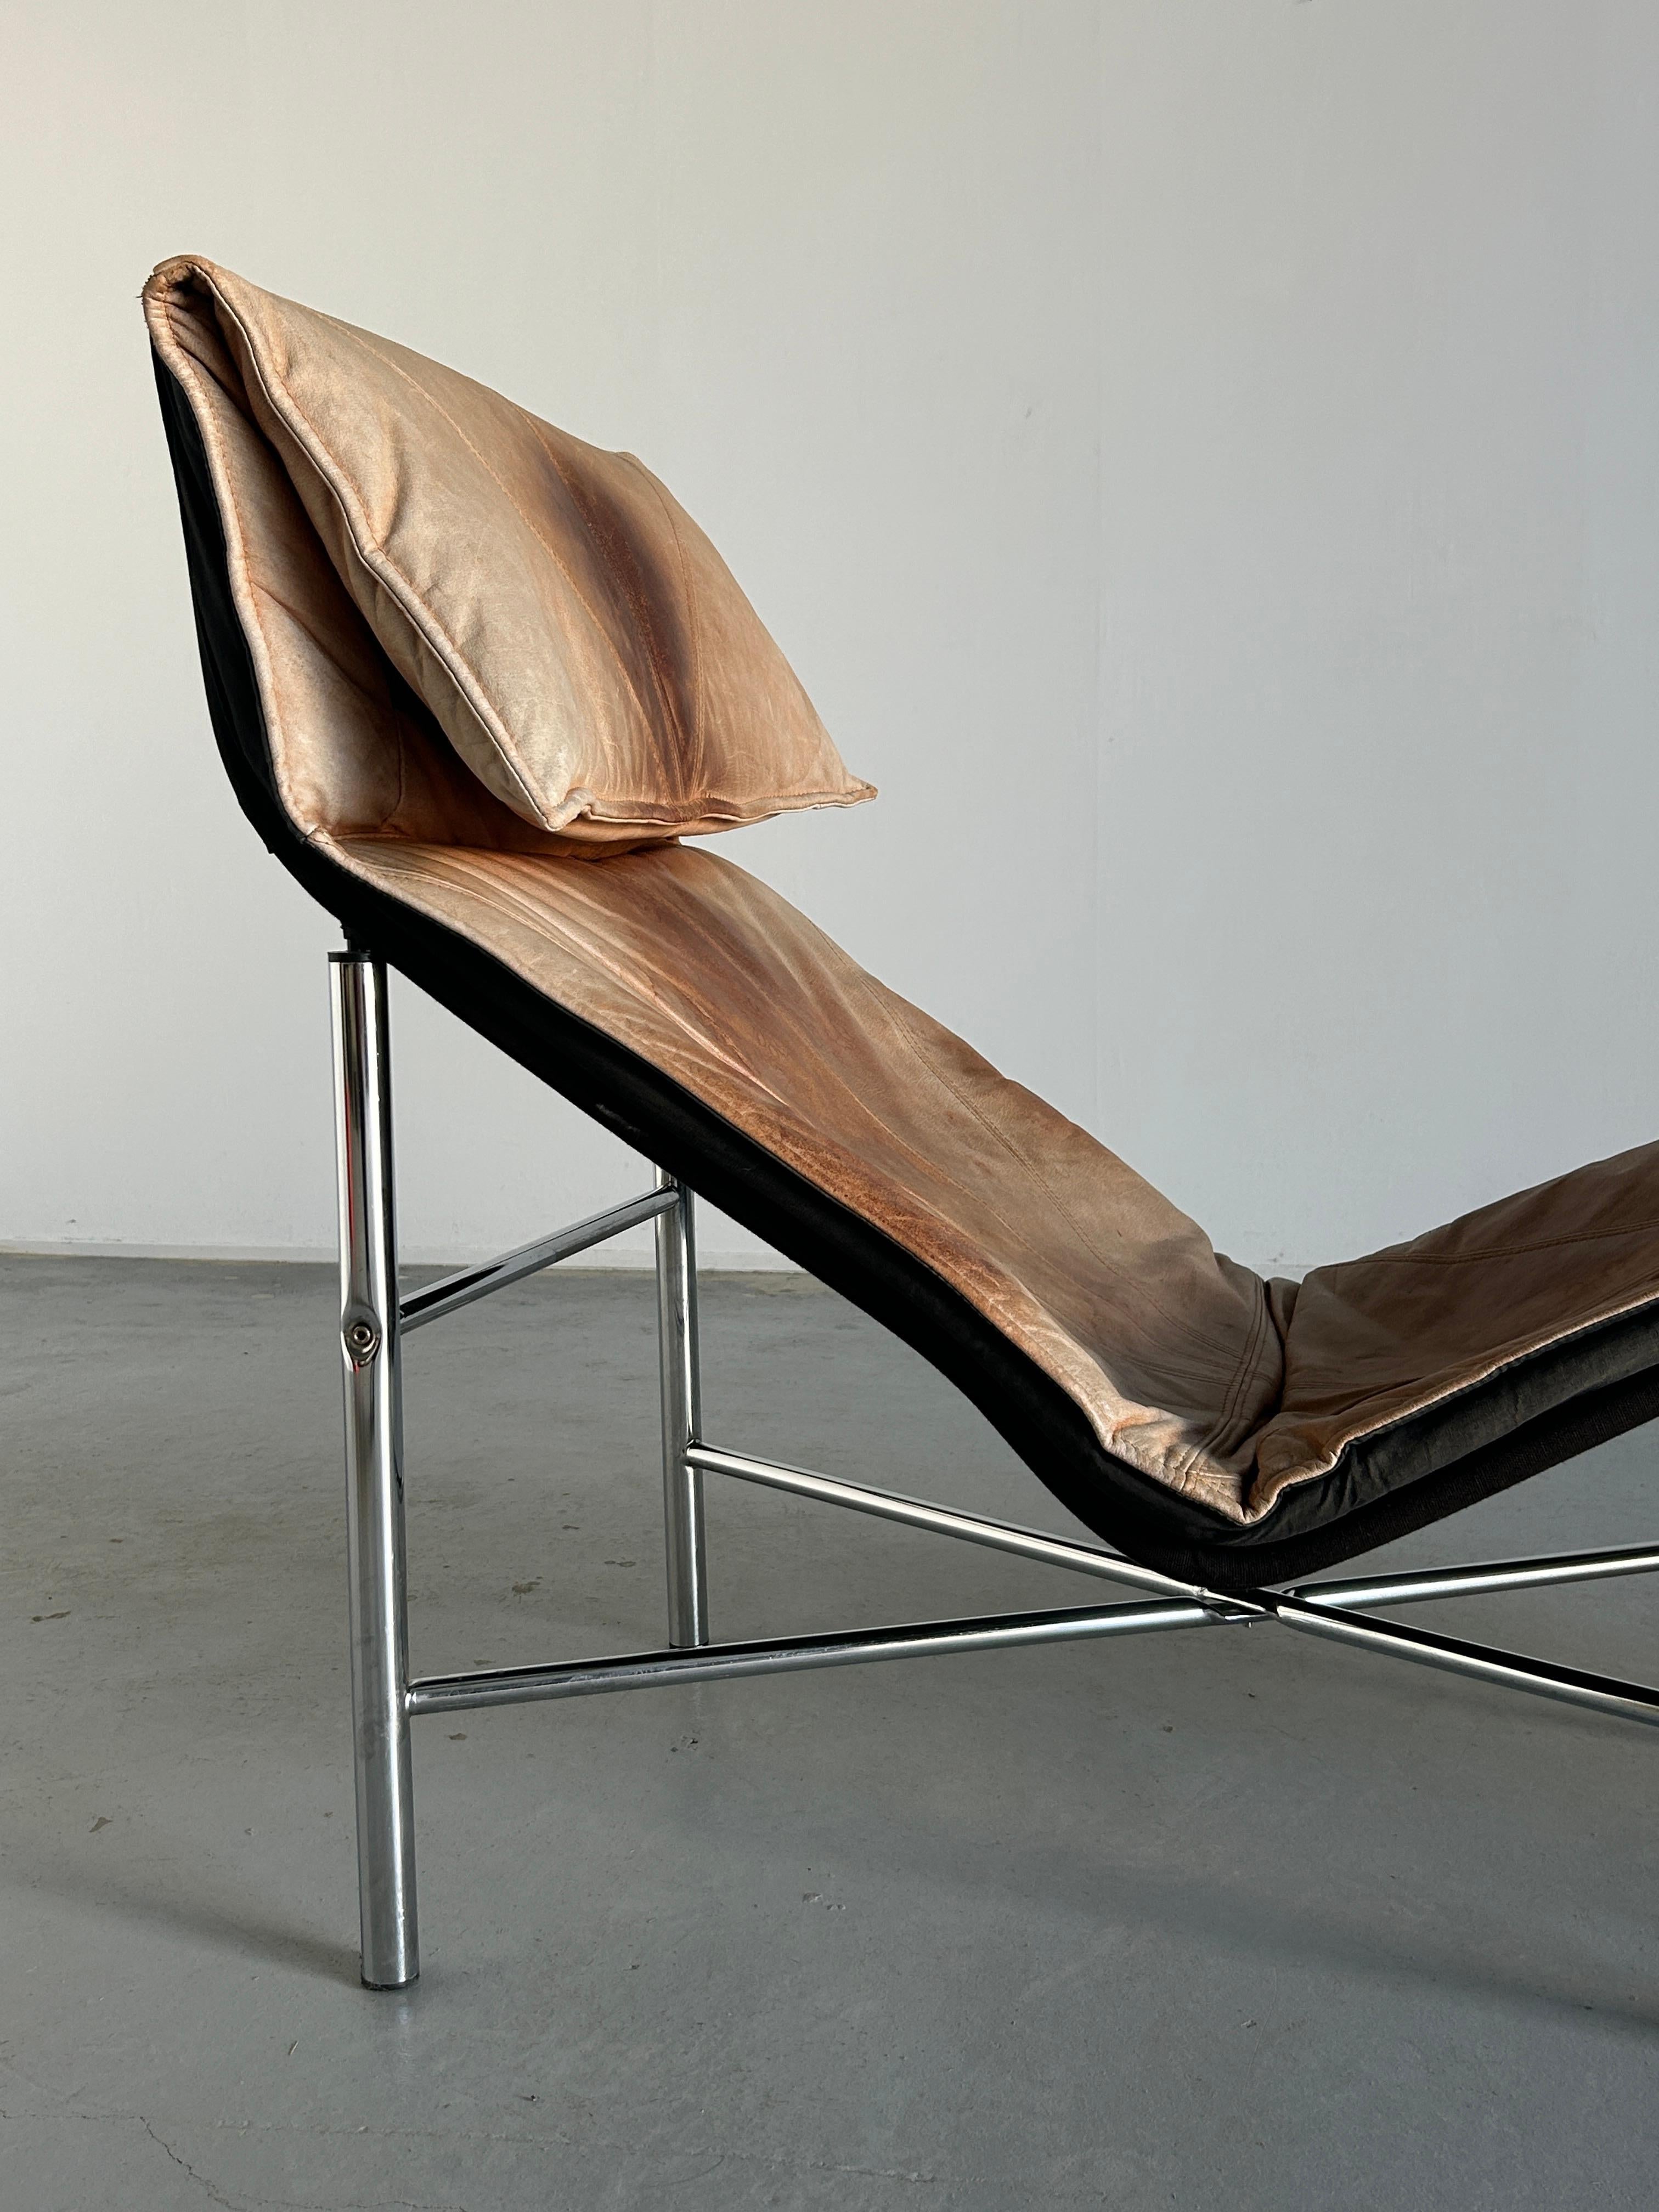 Vintage Leather Chaise Longue in Cognac Leather by Tord Bjorklund for Ikea, 1980 1